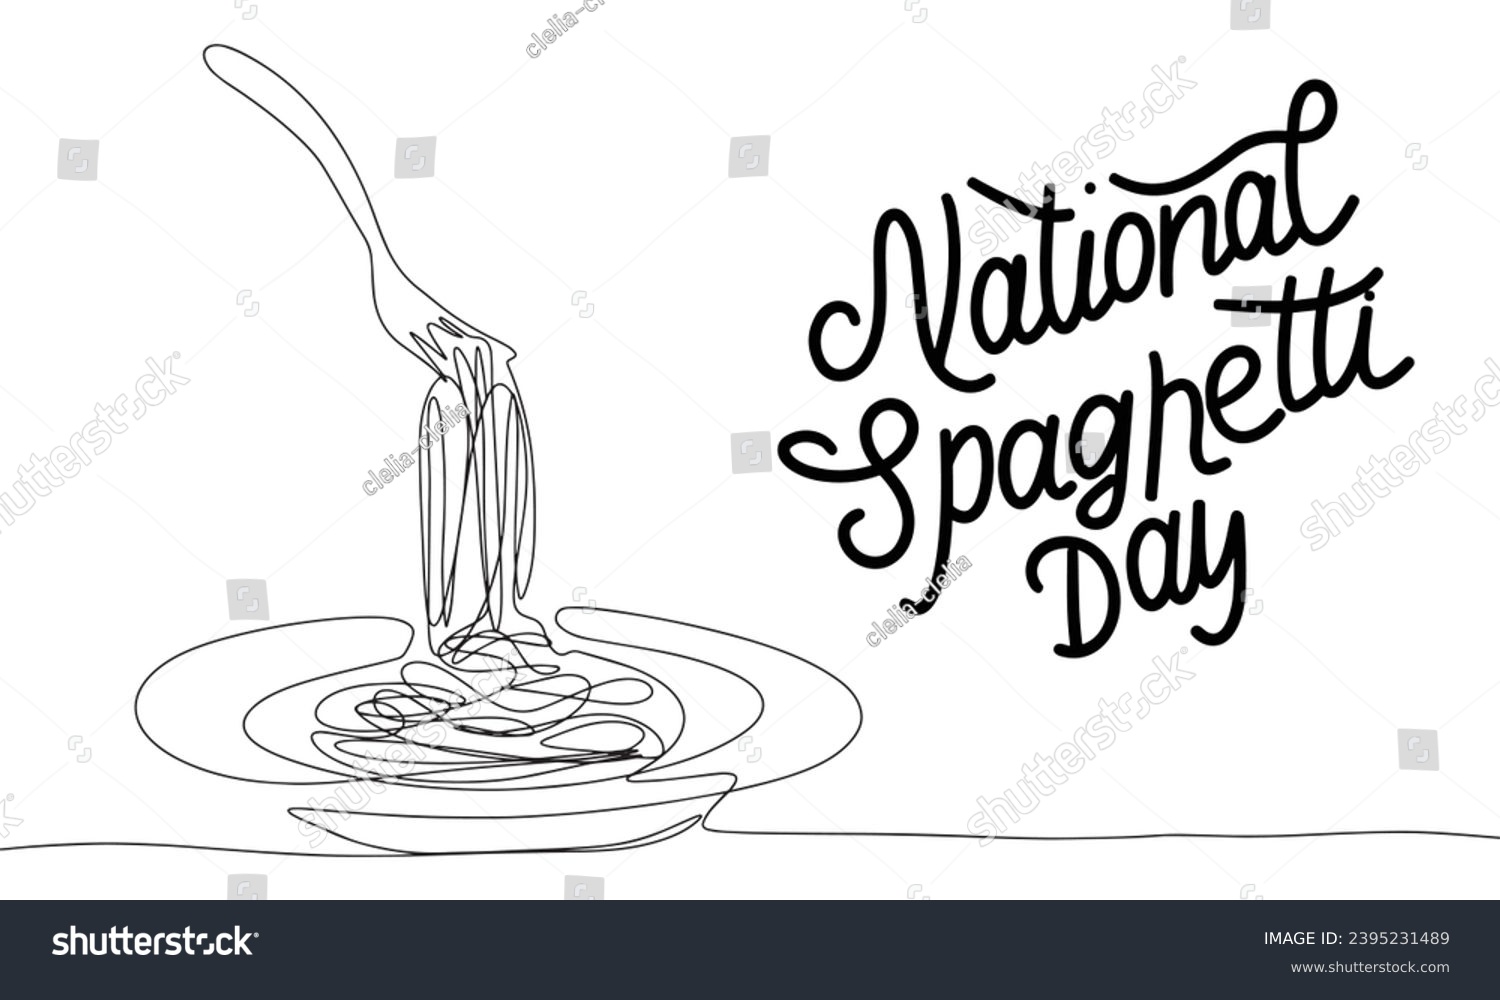 National Spaghetti Day banner. Handwriting lettering National Spaghetti Day text and line art fork with spaghetti in plate. Hand drawn vector art. #2395231489